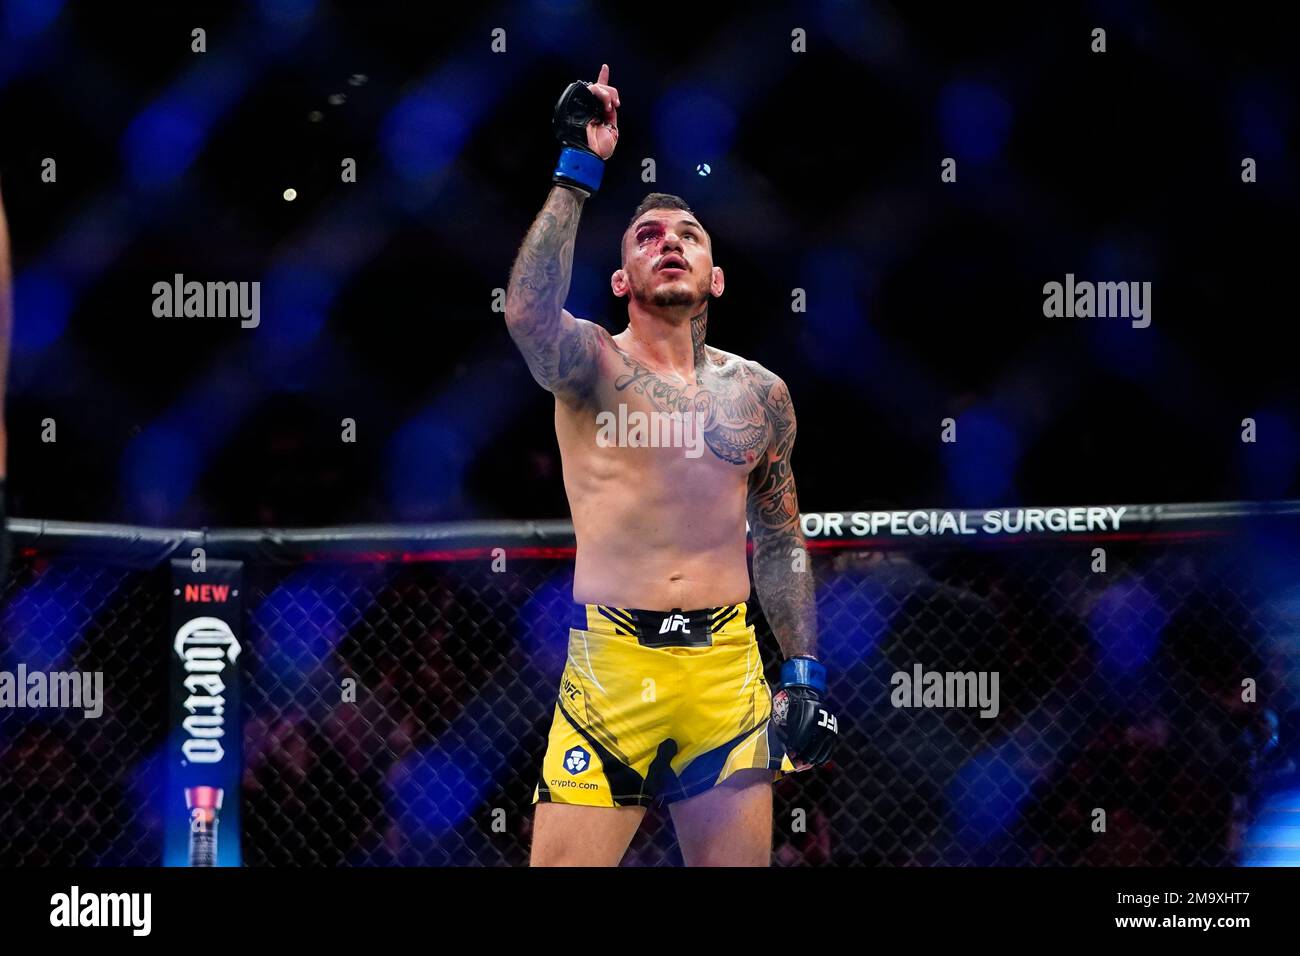 Brazil's Renato Moicano celebrates after a lightweight bout